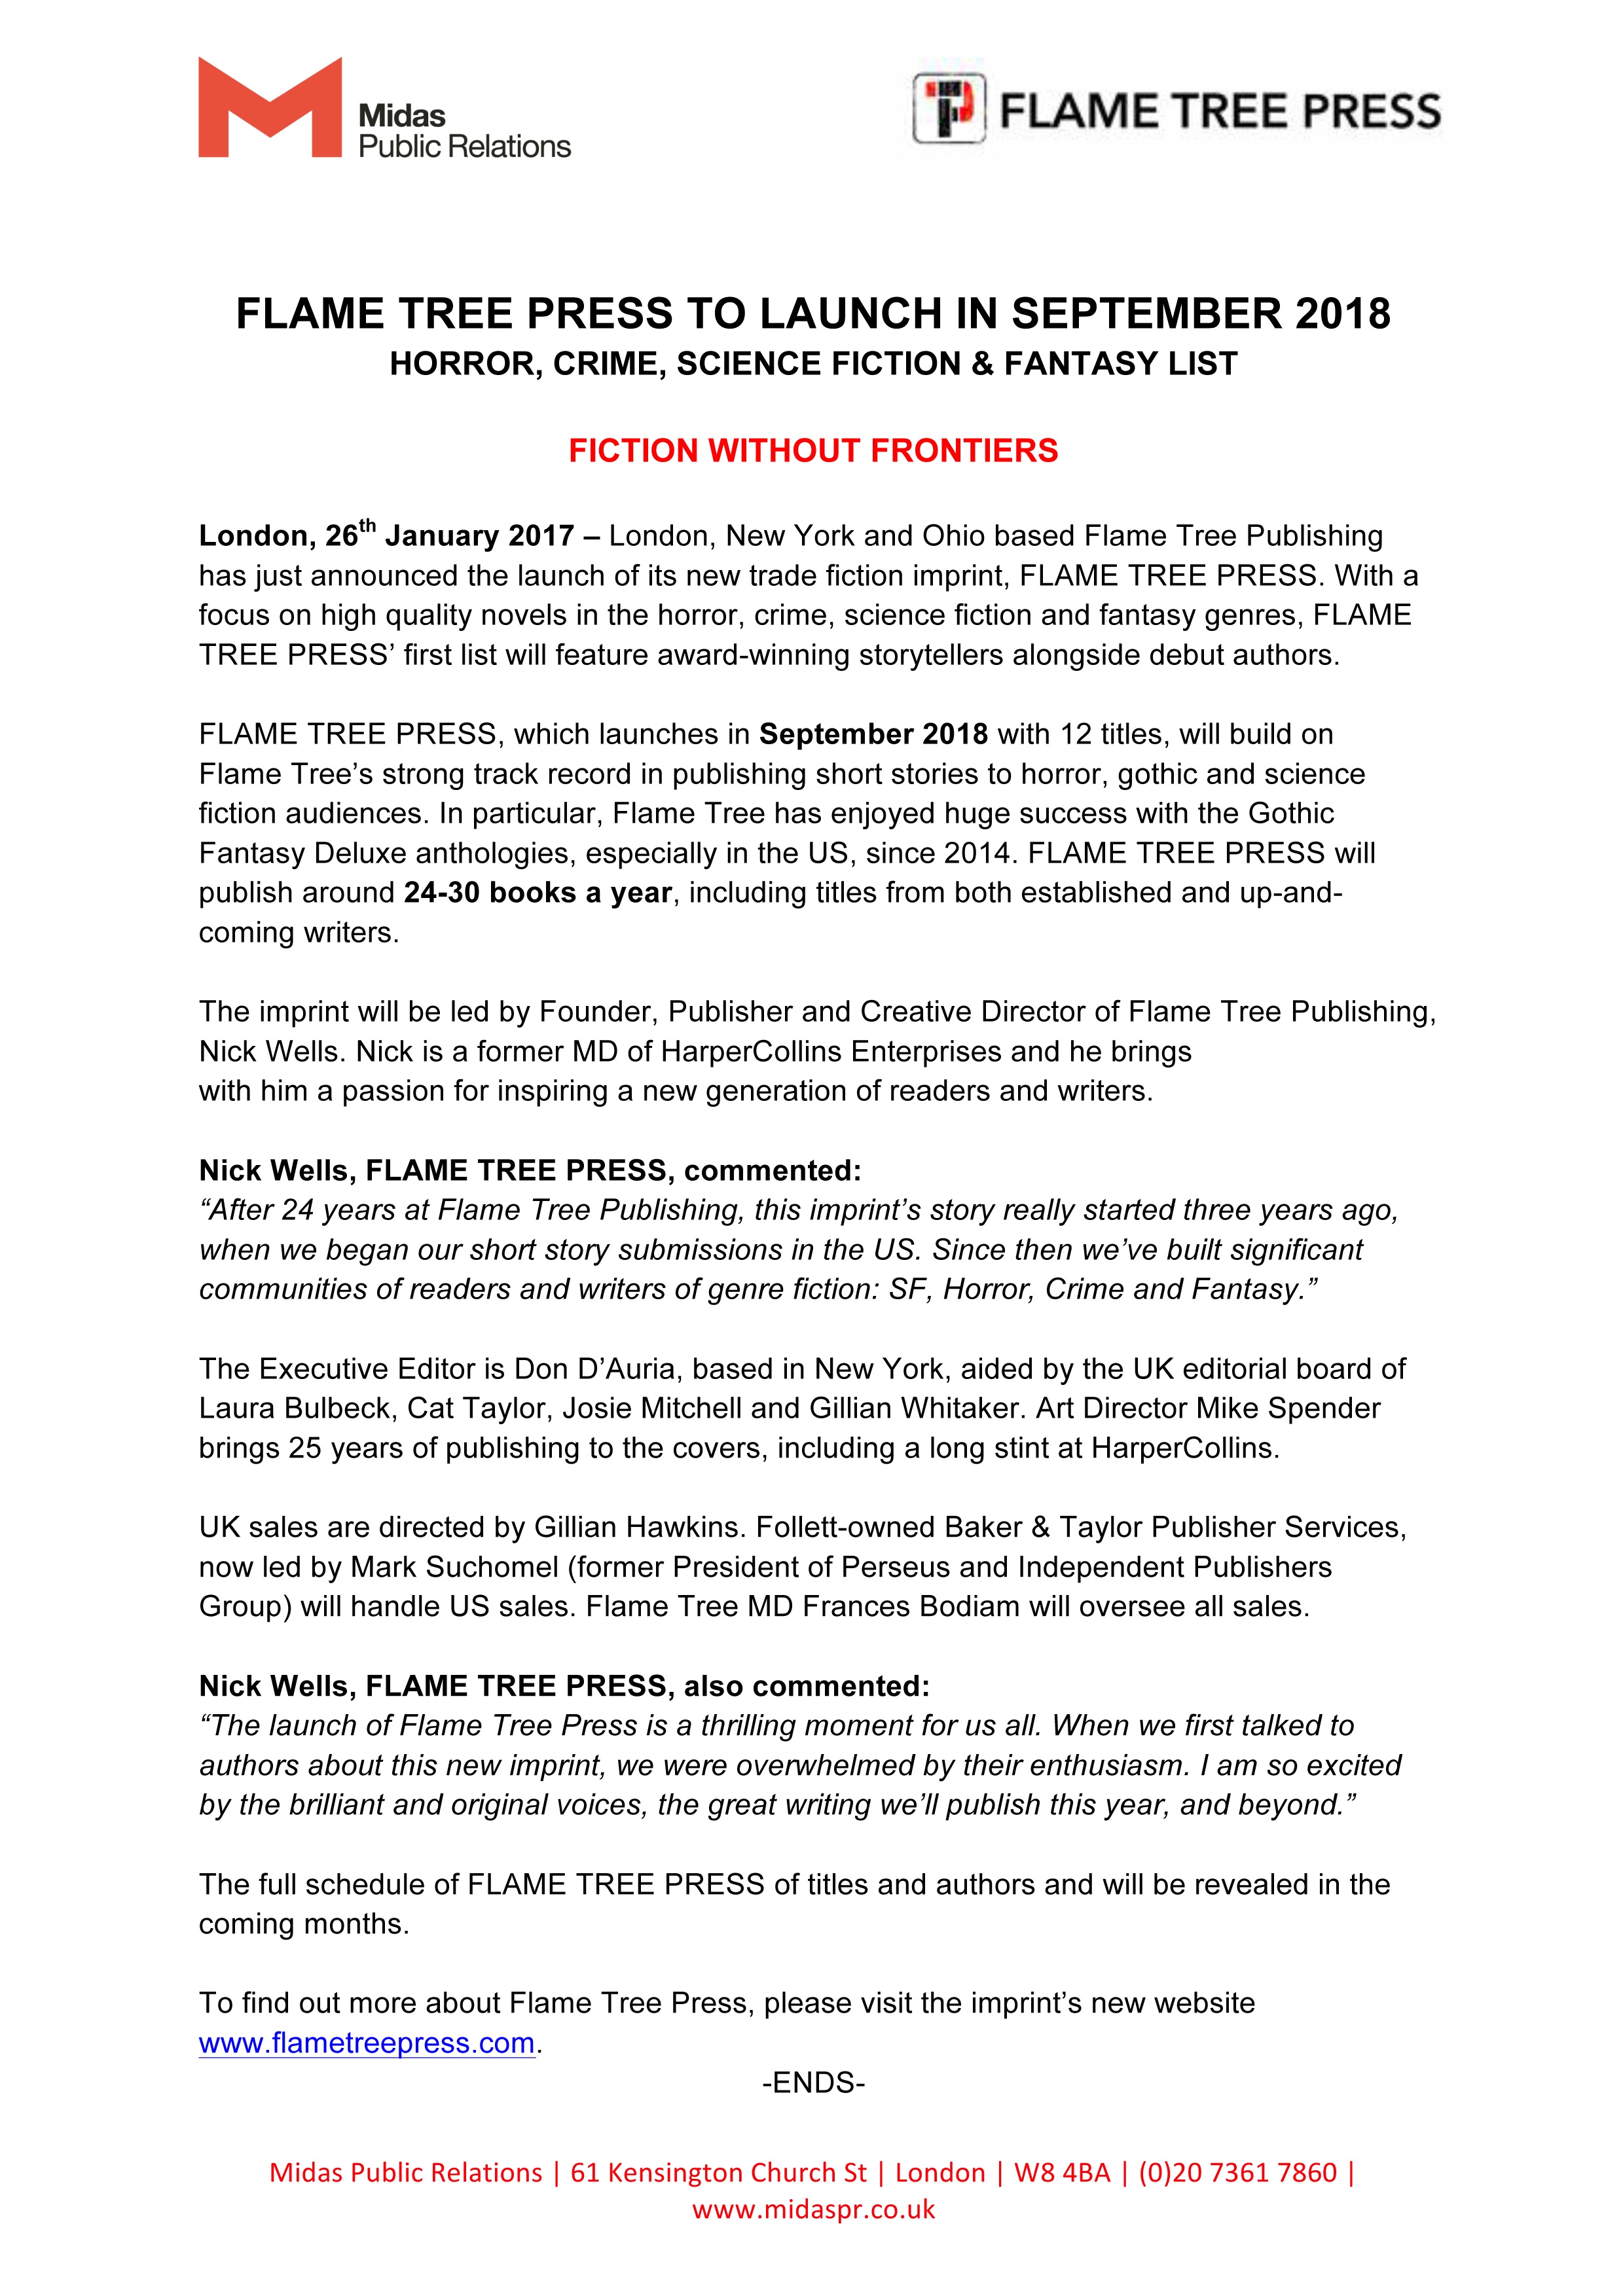 Flame Tree Press launch press release FINAL page 1.jpg